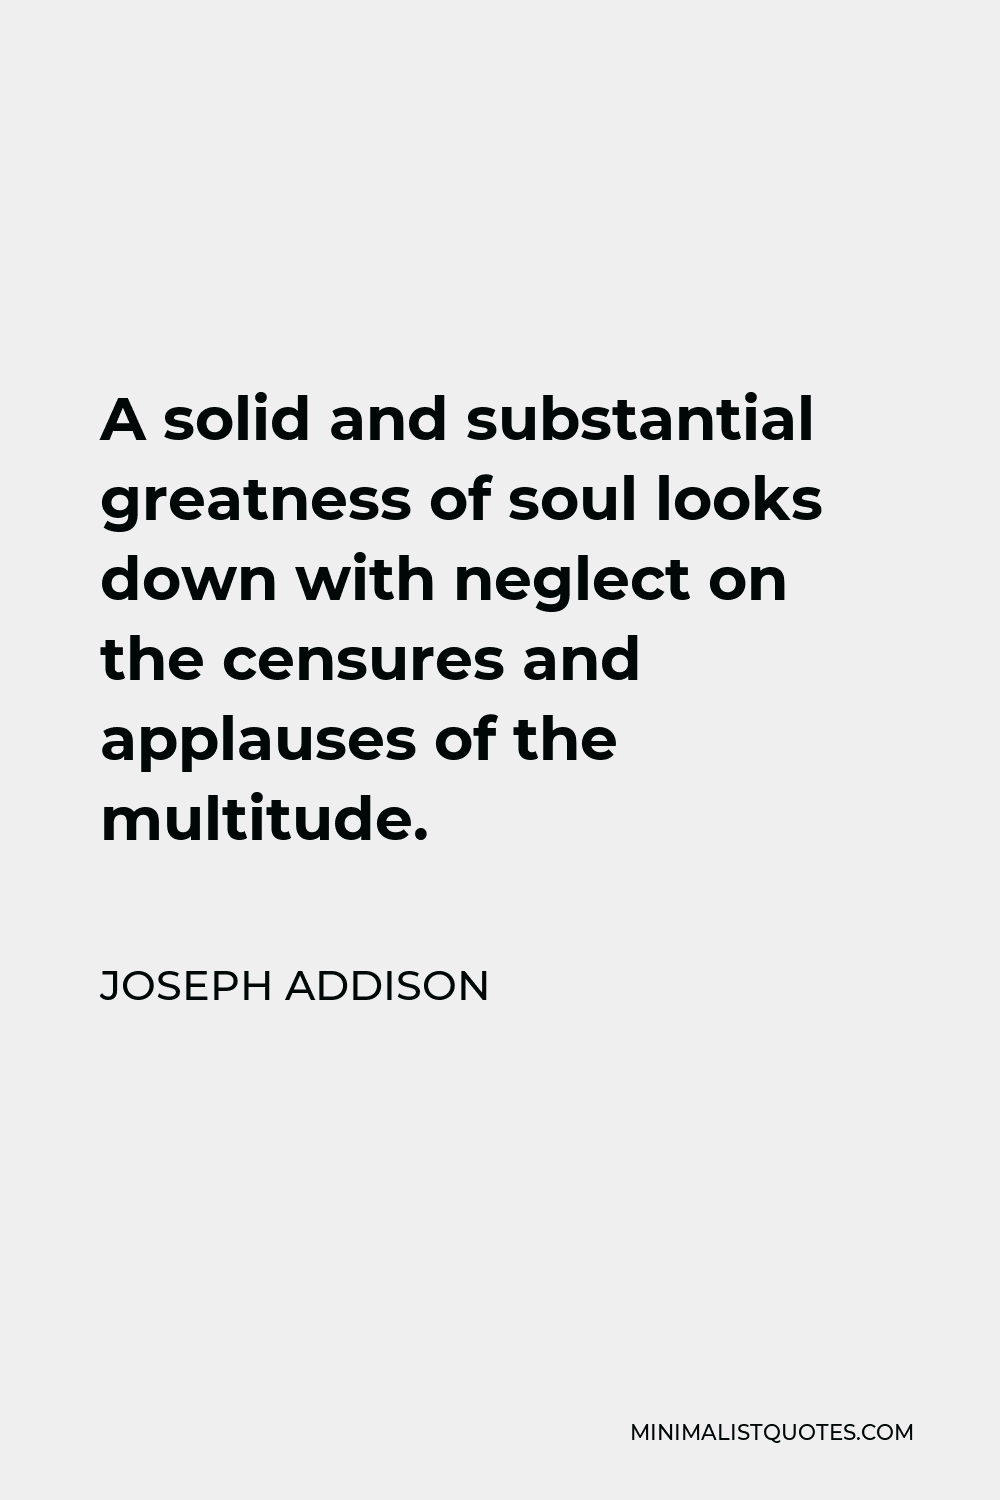 Joseph Addison Quote - A solid and substantial greatness of soul looks down with neglect on the censures and applauses of the multitude.